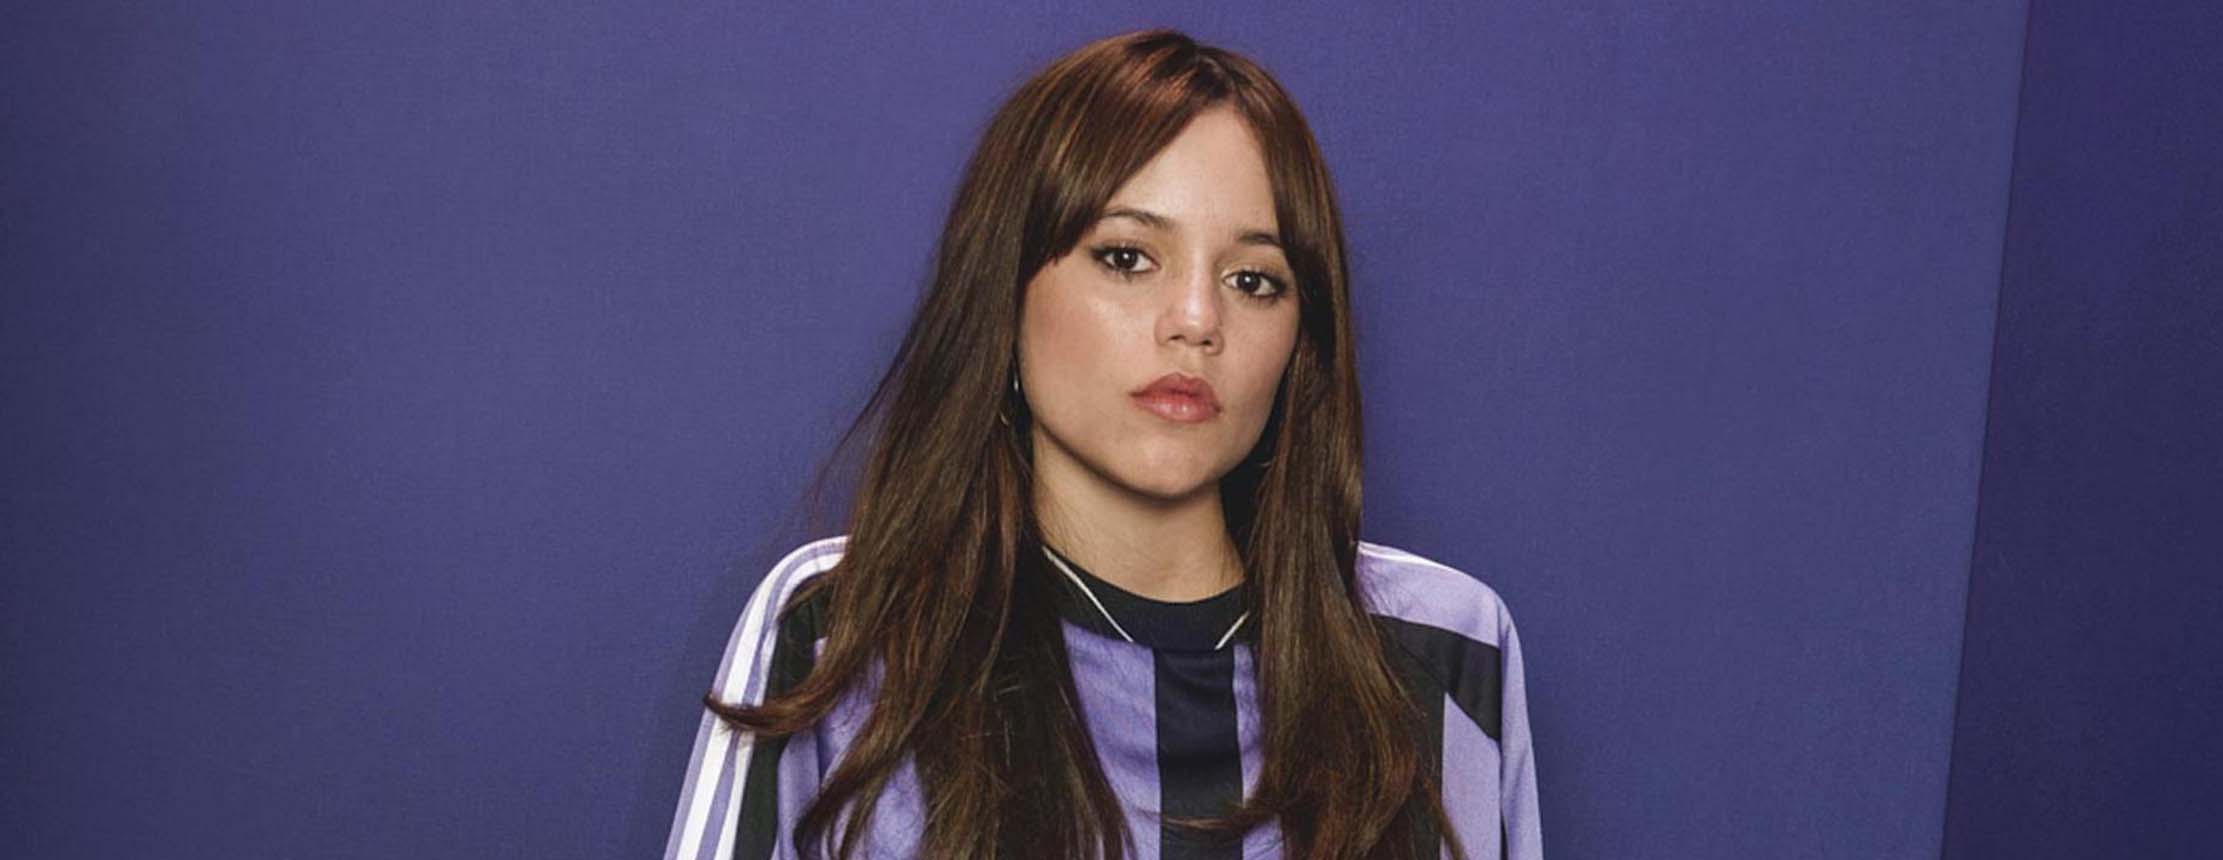 Trailblazing actress, producer and style icon jenna ortega, is the newest addition to adidas’s global family